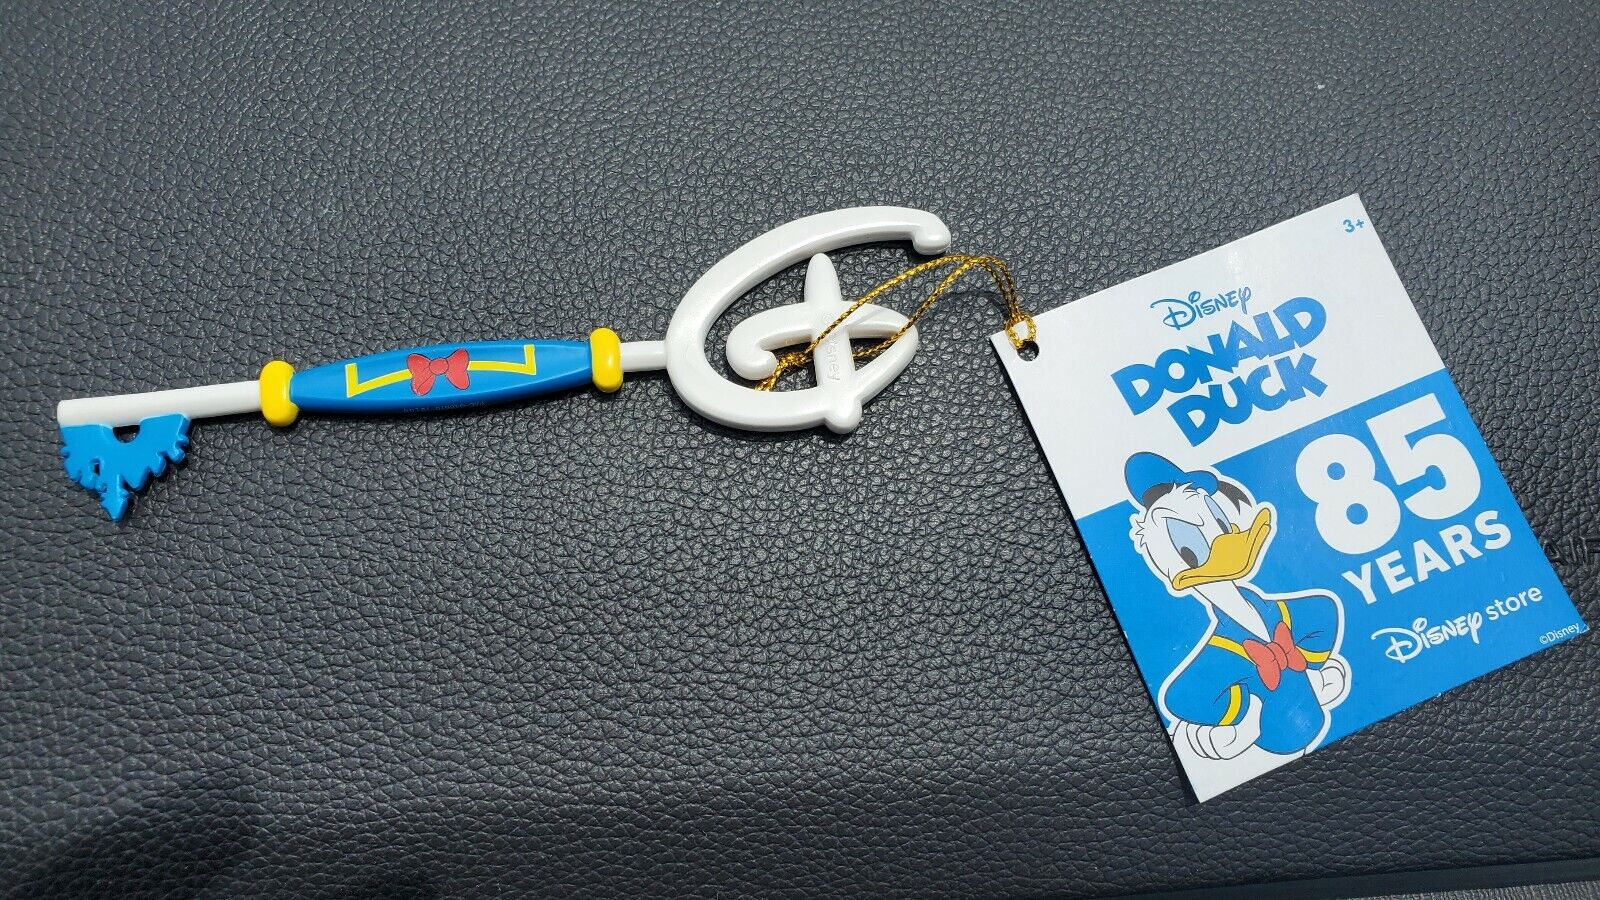 Donald Duck 85th Anniversary Years Disney Store Limited Edition Celebration Key